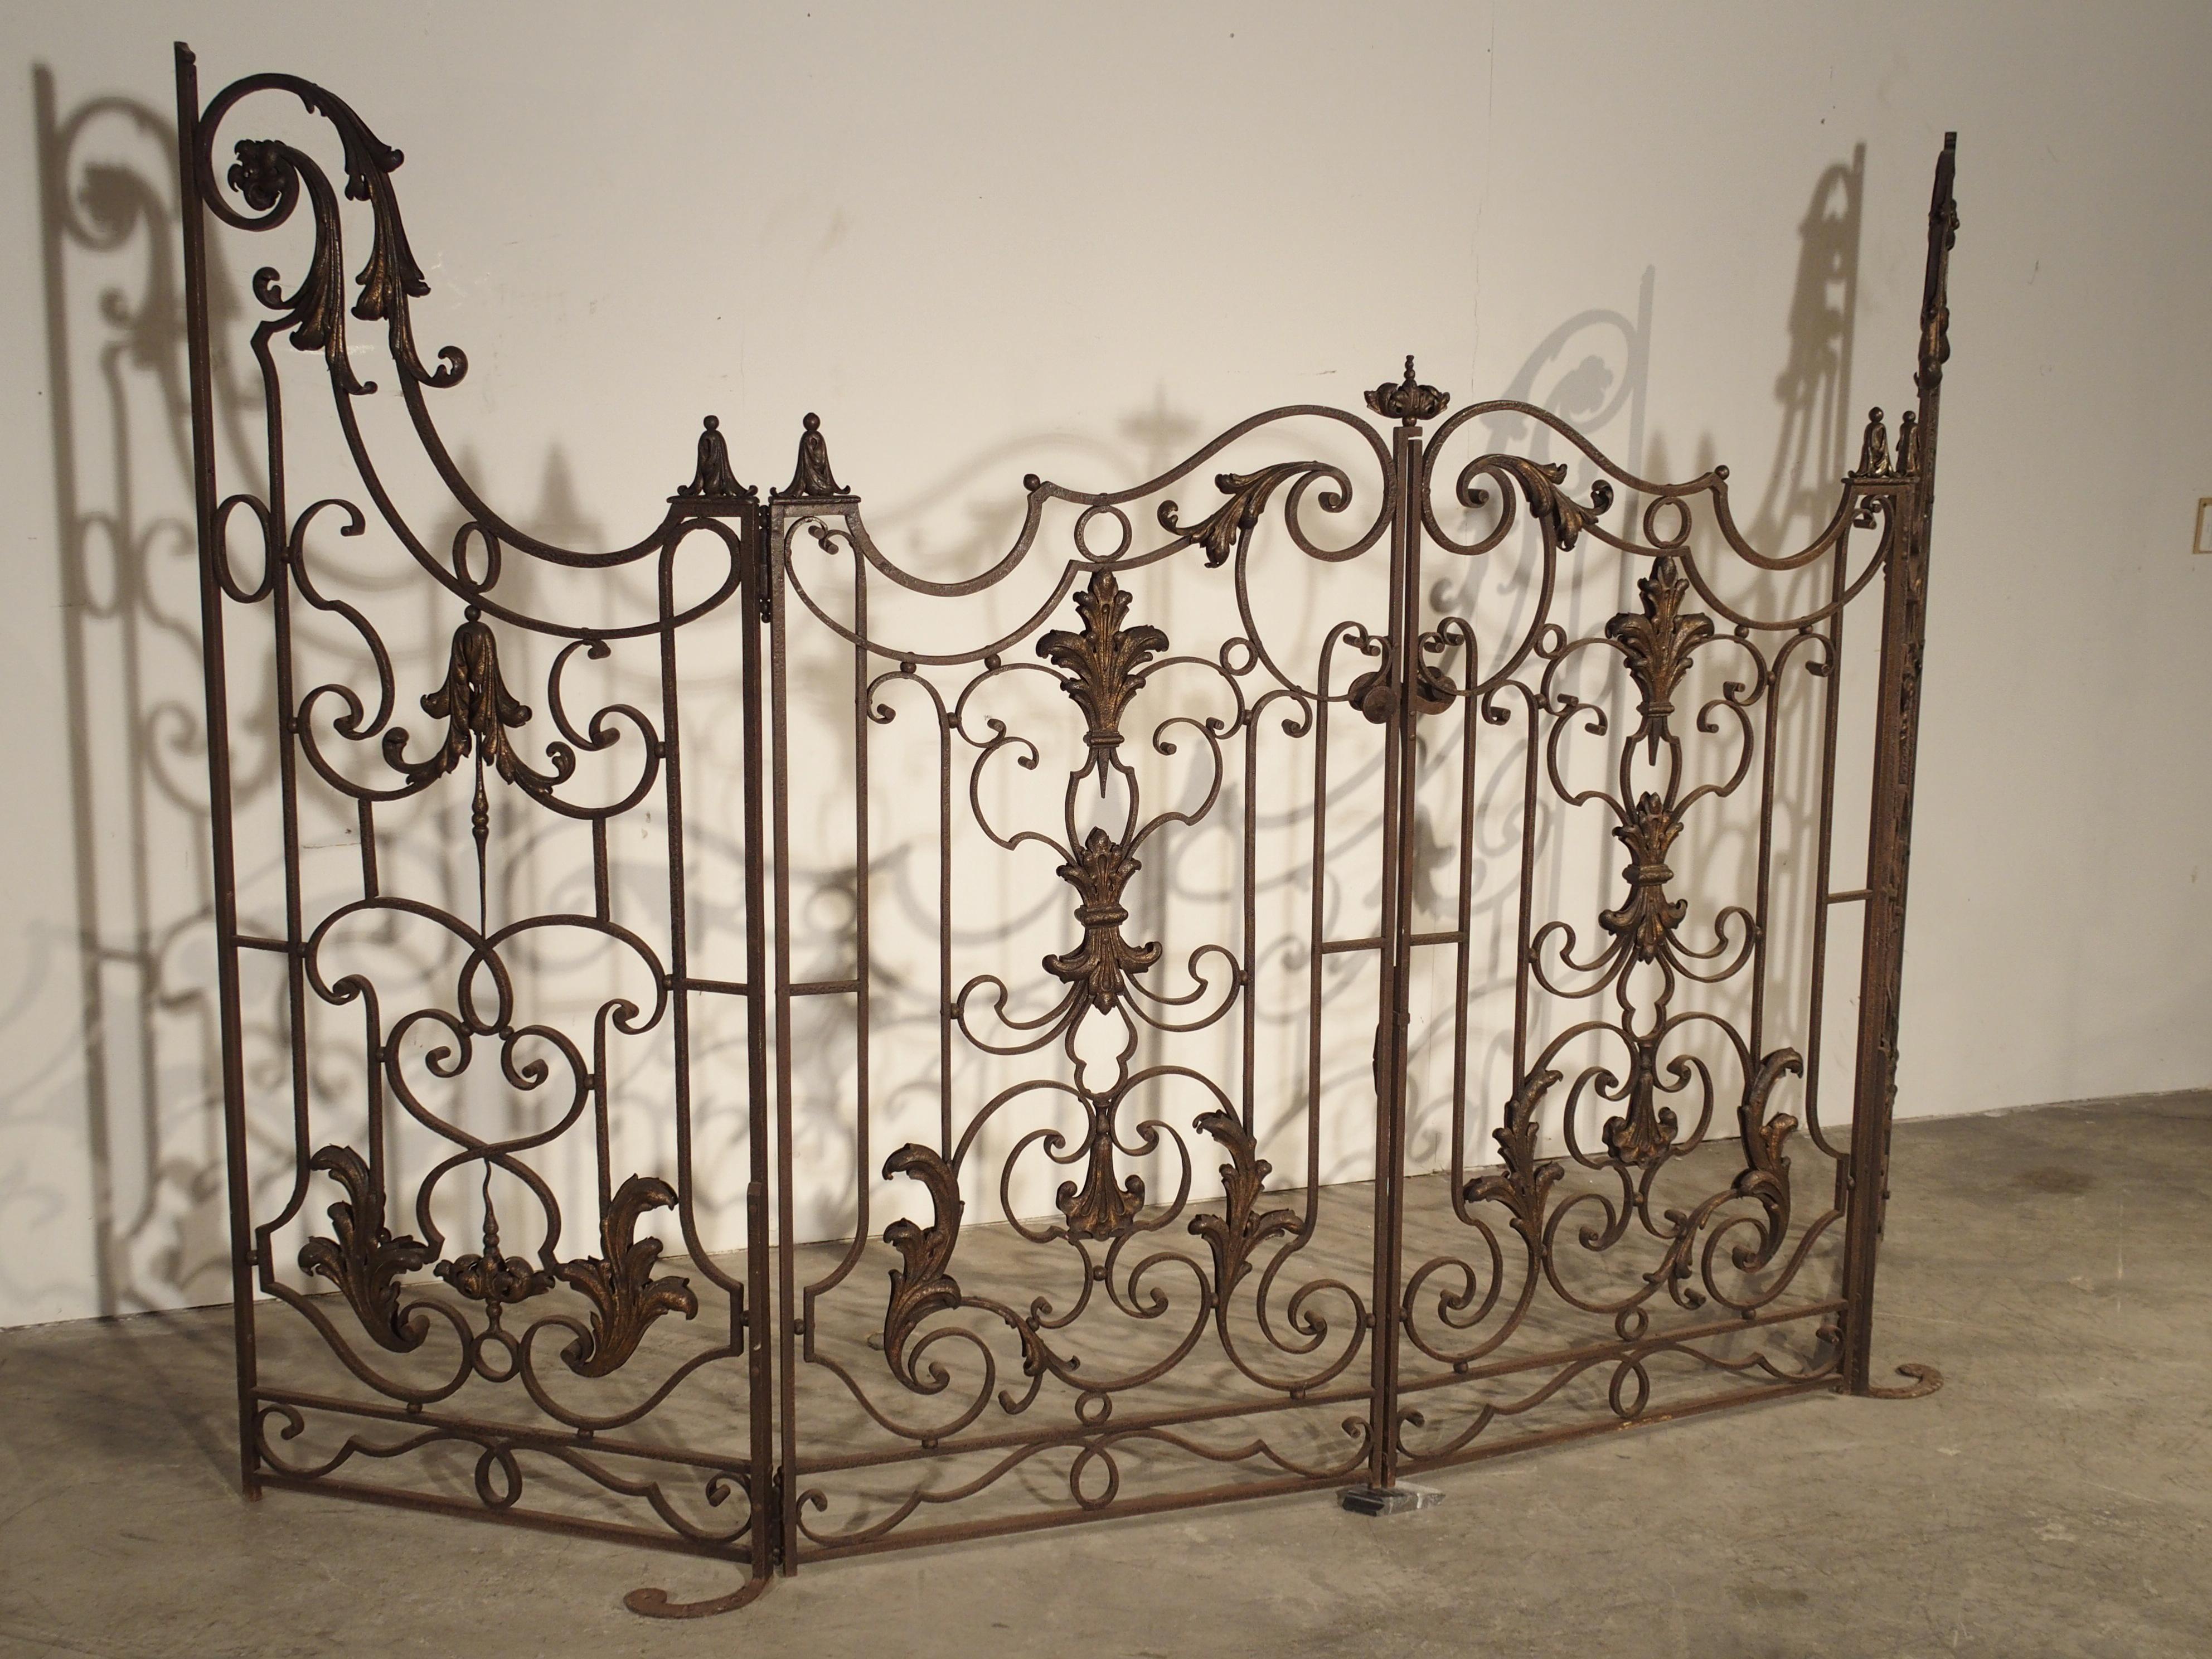 This fabulous 4 section wrought iron gate from France has beautiful scrolling motifs throughout, and it is in excellent overall condition. Some of the tole motifs have been modestly highlighted with gold lacquer. The rest of the iron gate has a worn